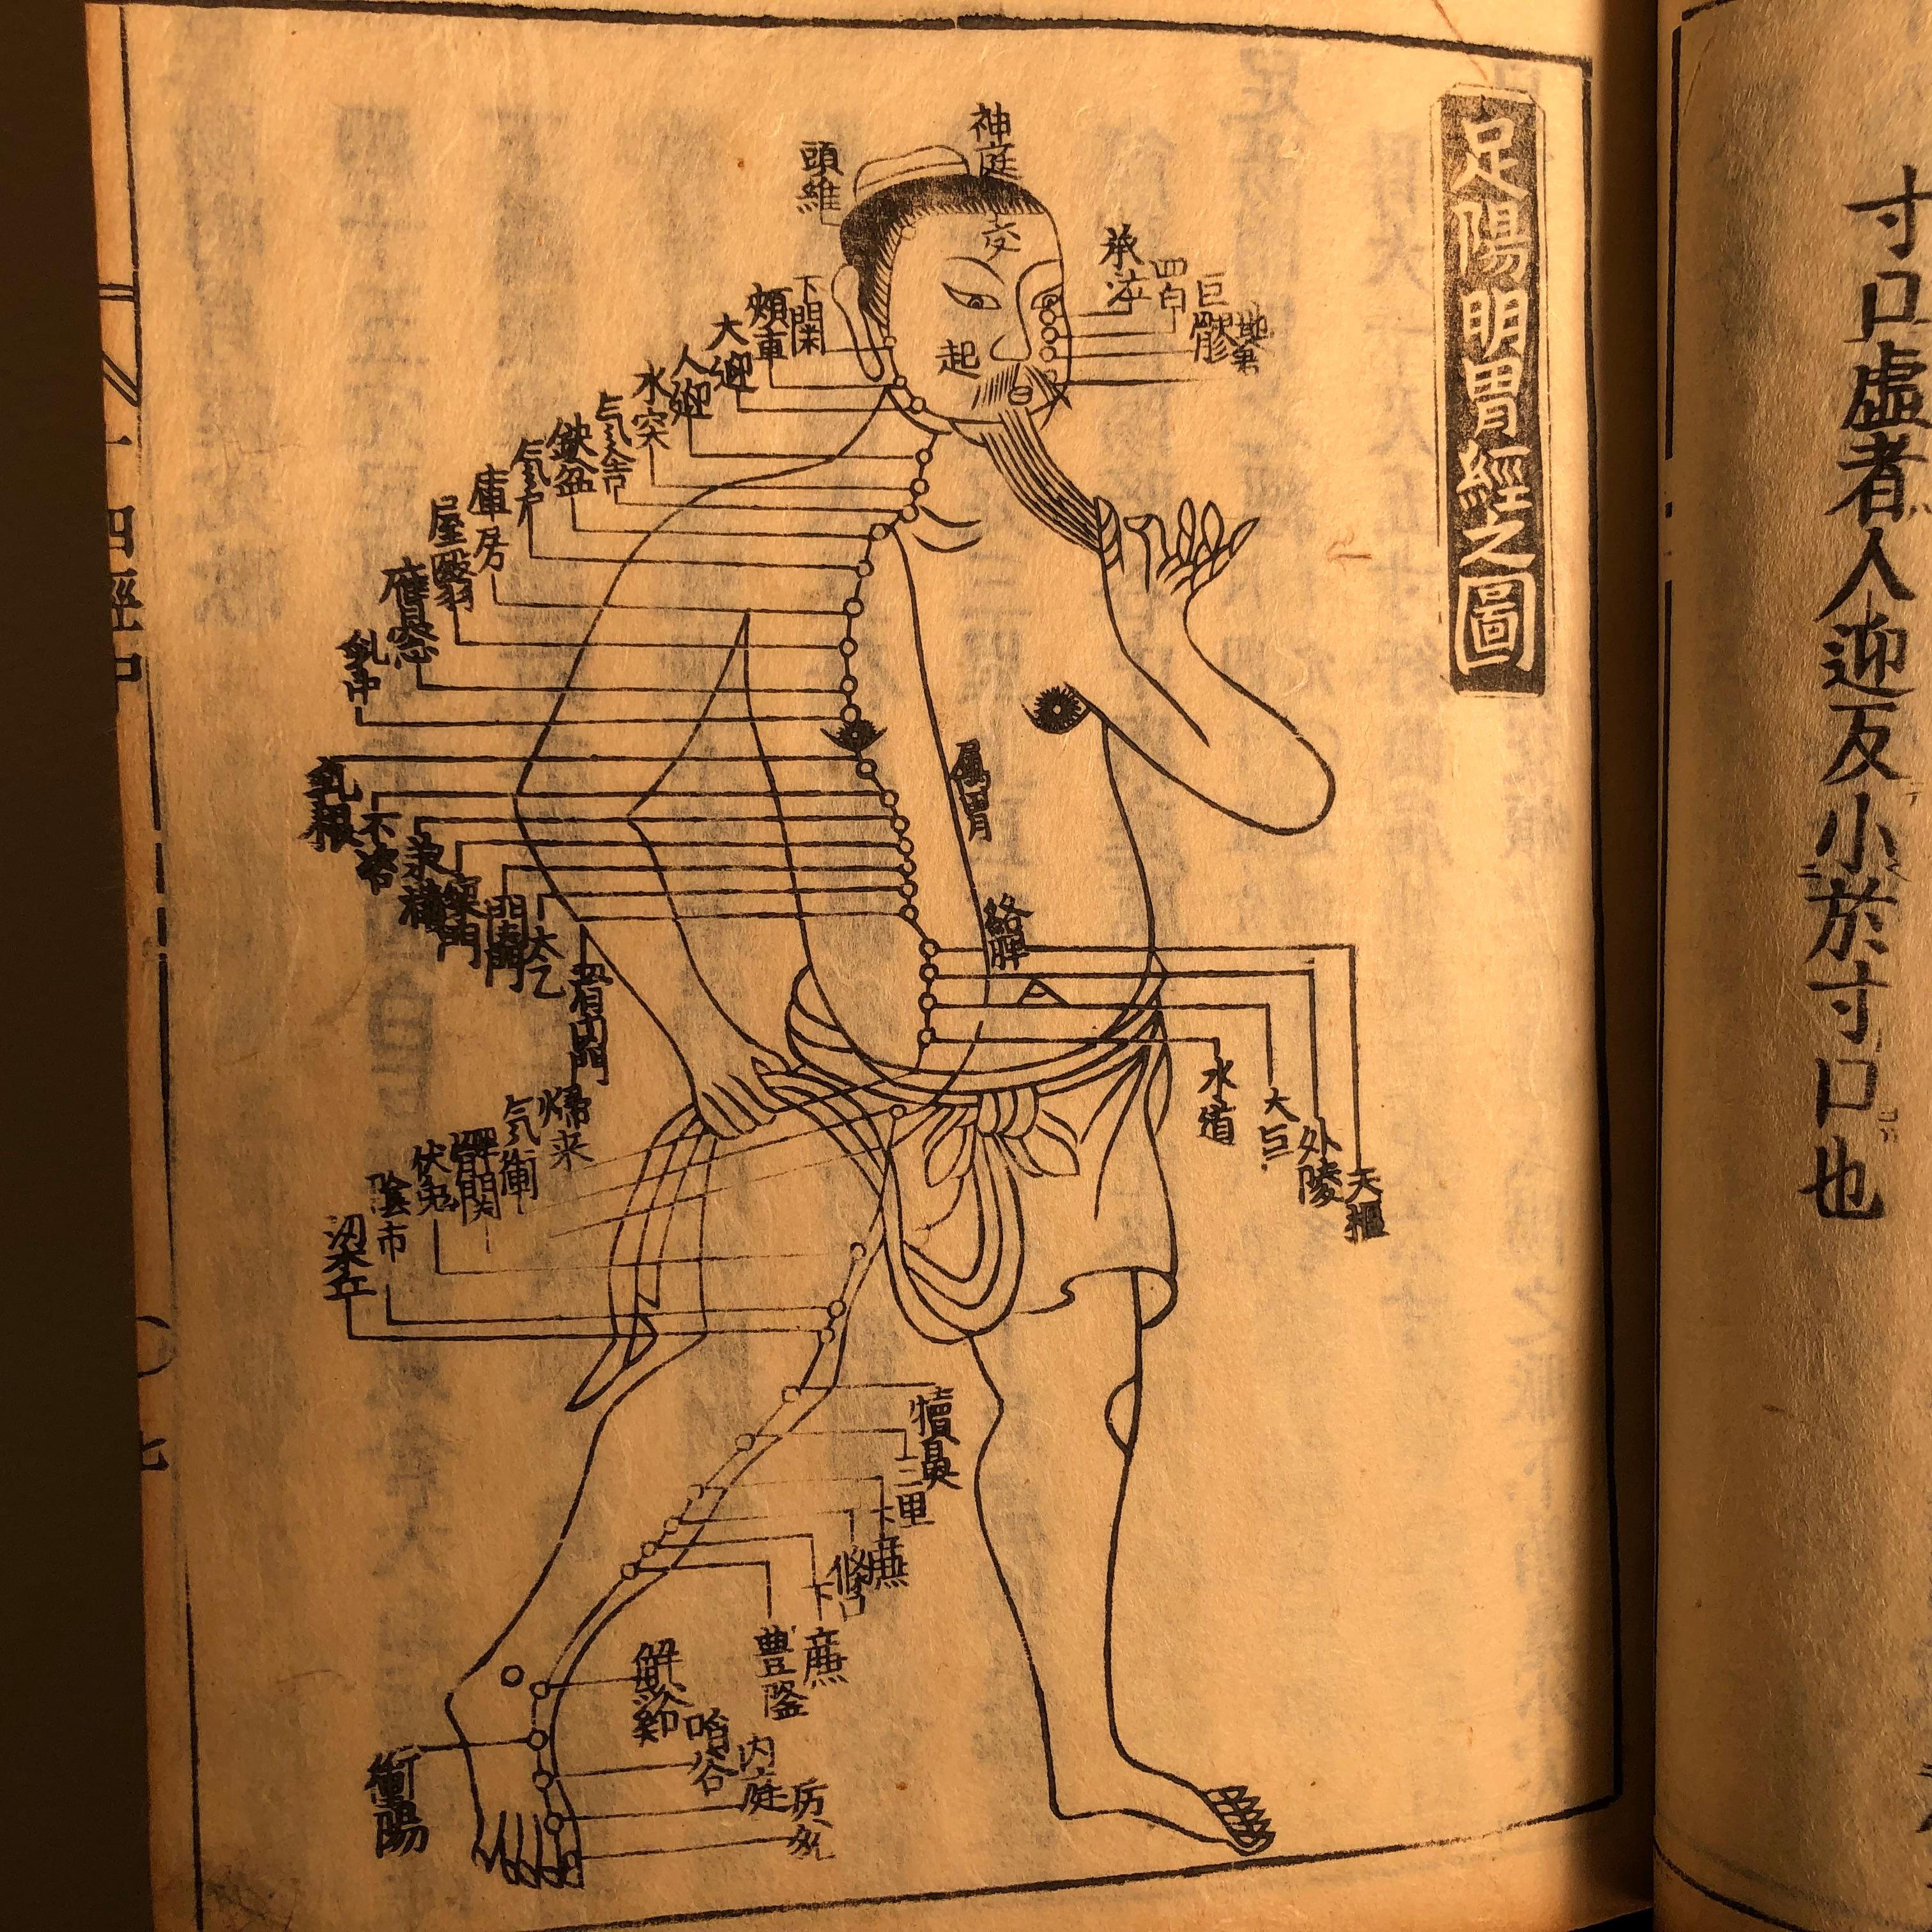 Hand-Crafted Important Acupuncture Japanese Antique Woodblock Guide Book, 19th Century Prints